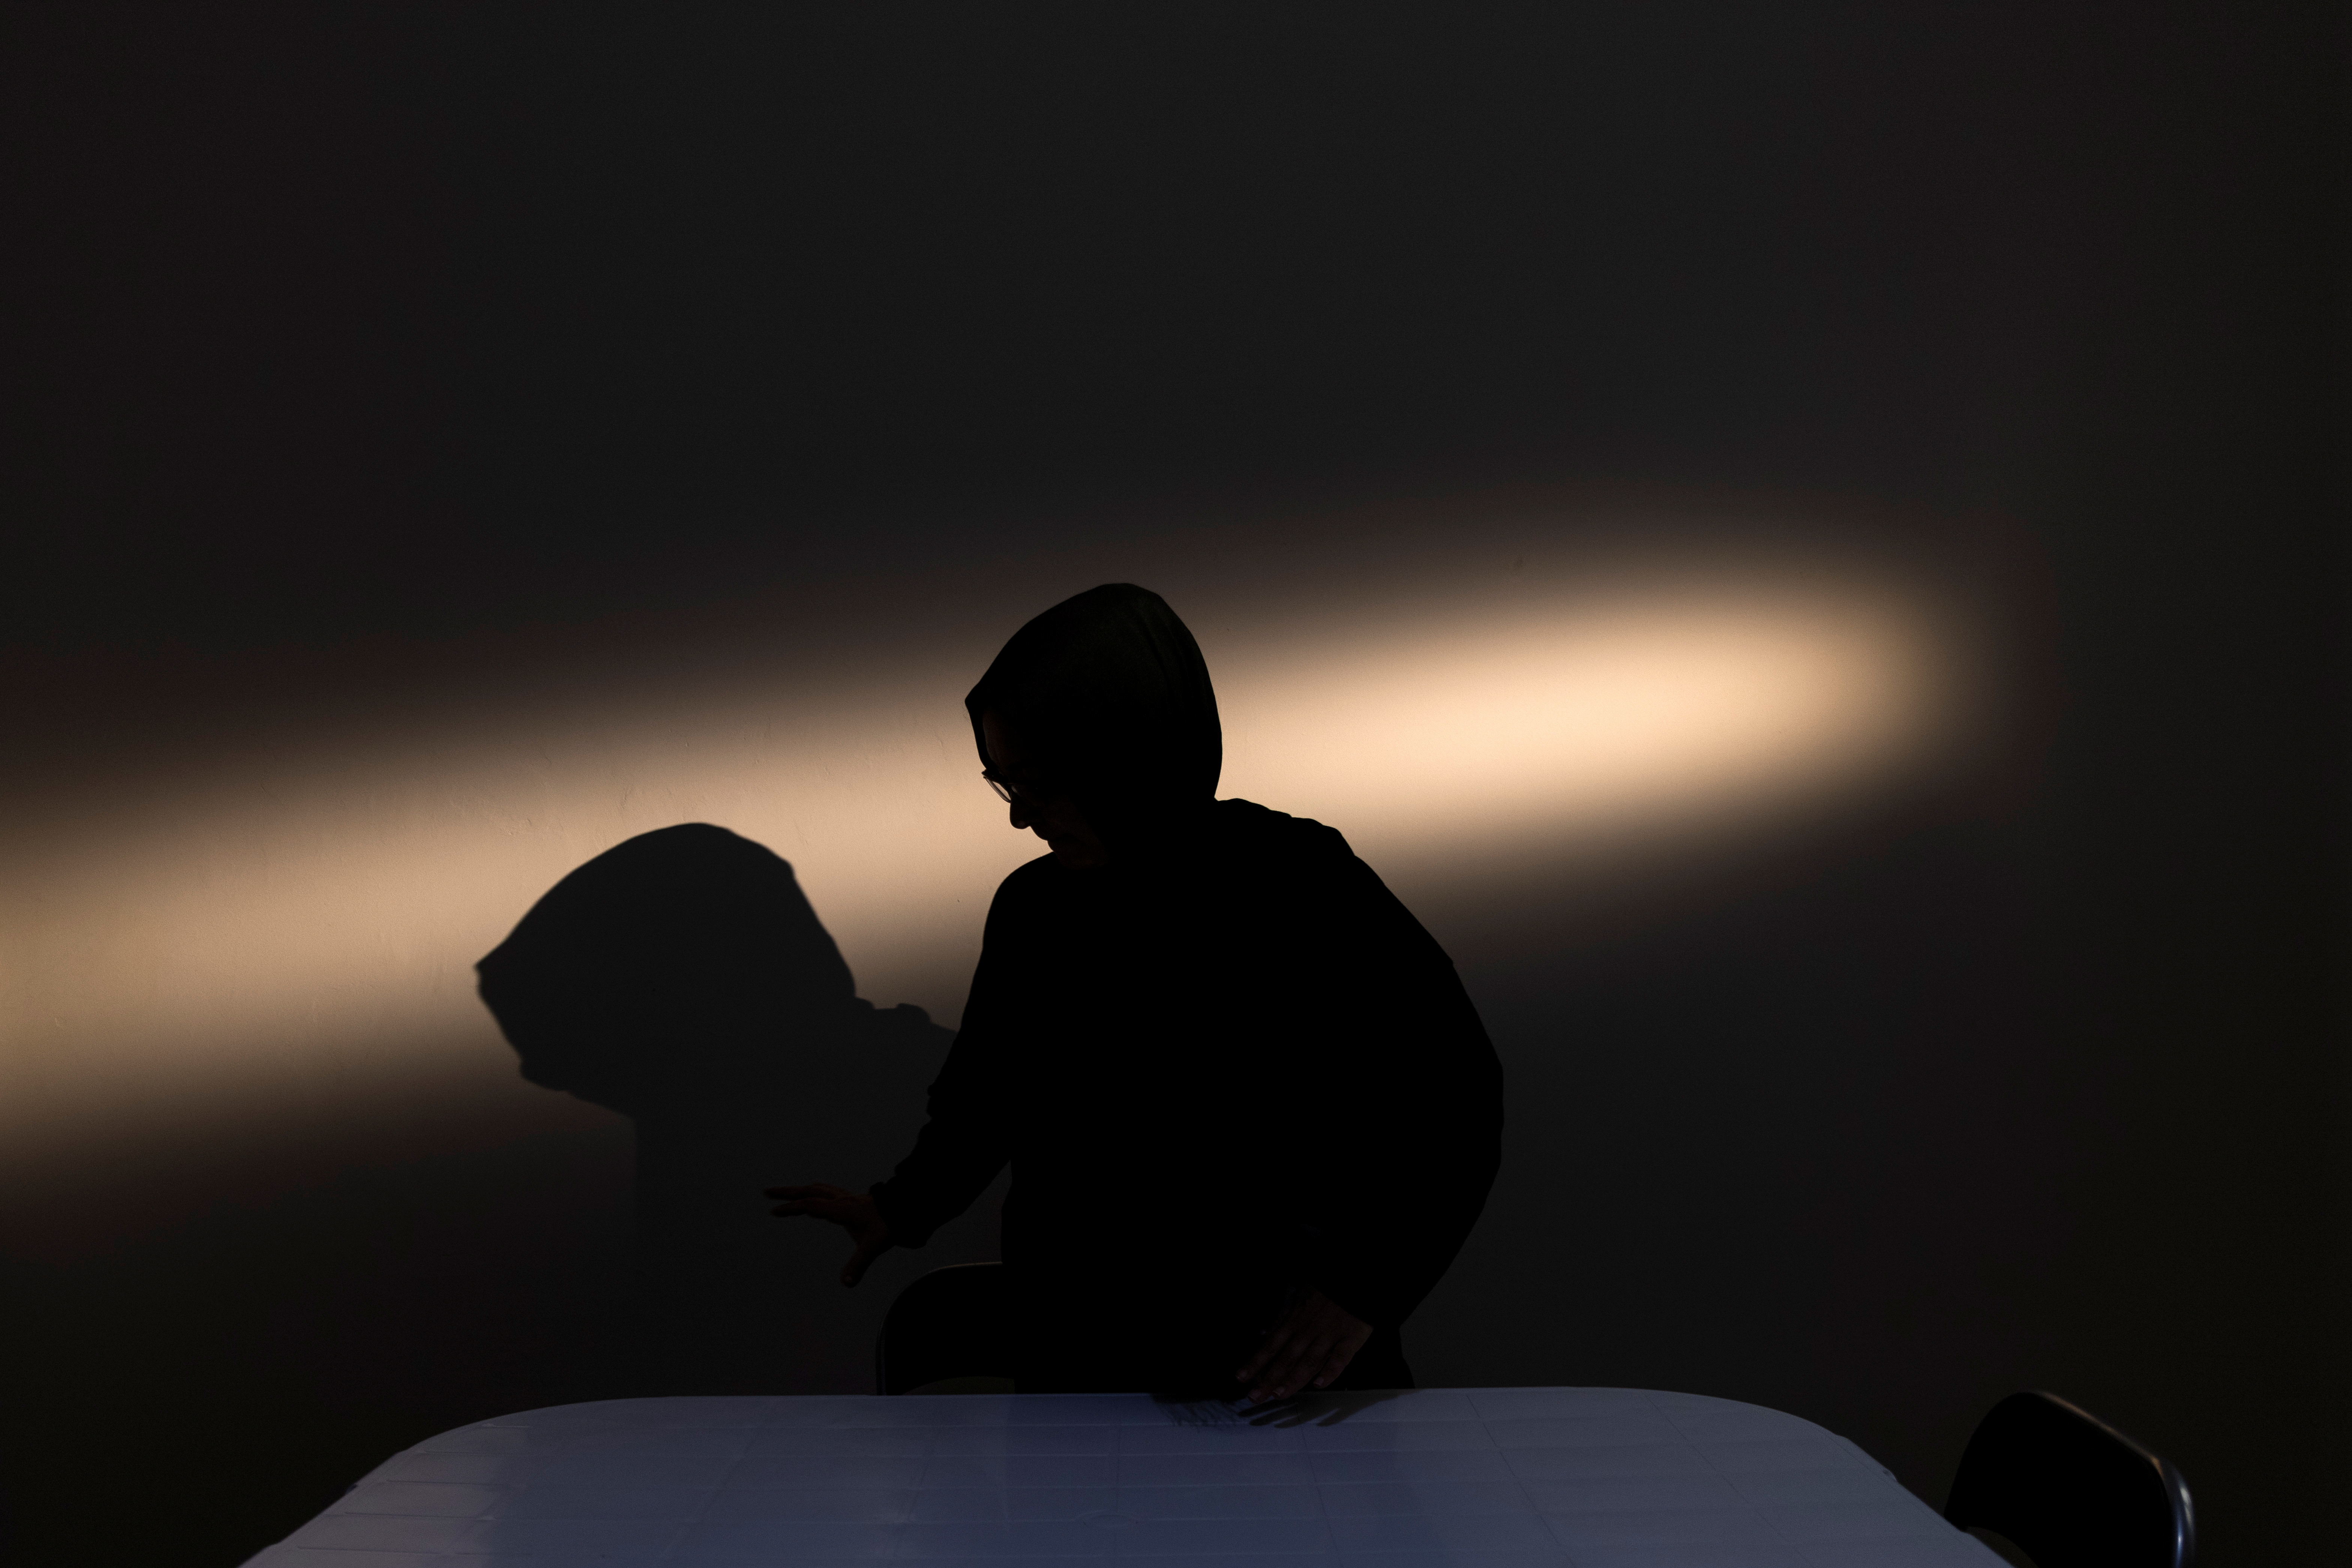 Afghan judge Friba Quraishi is silhouetted in her apartment in Athens